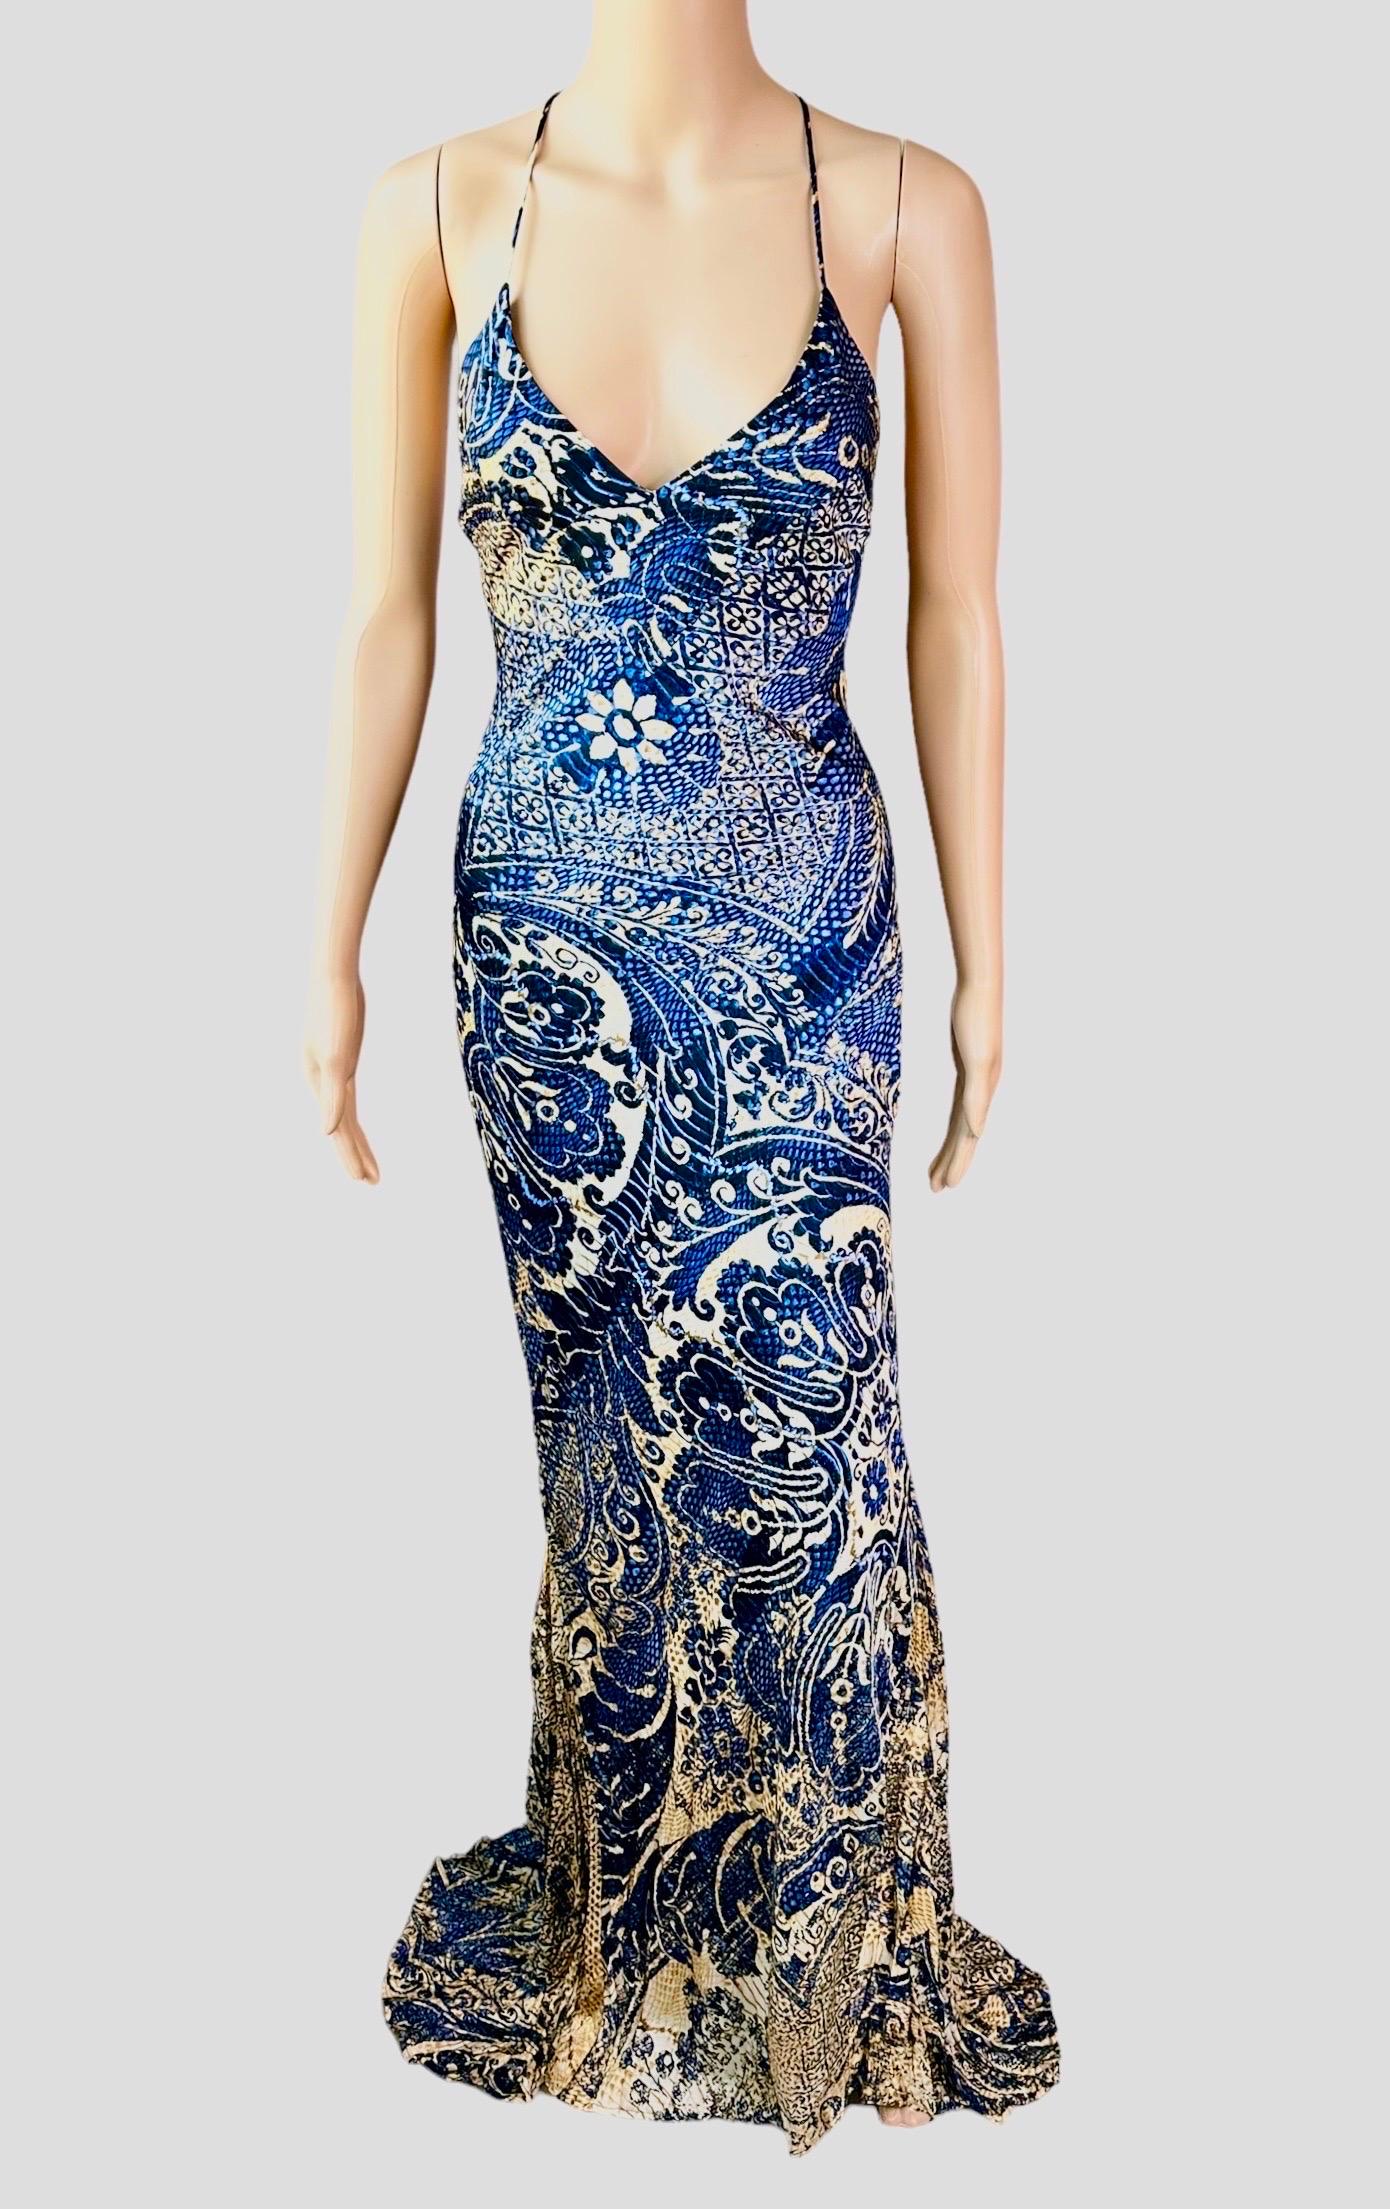 Roberto Cavalli c.2005 Bustier Abstract Print Train Maxi Evening Dress Gown In Good Condition For Sale In Naples, FL